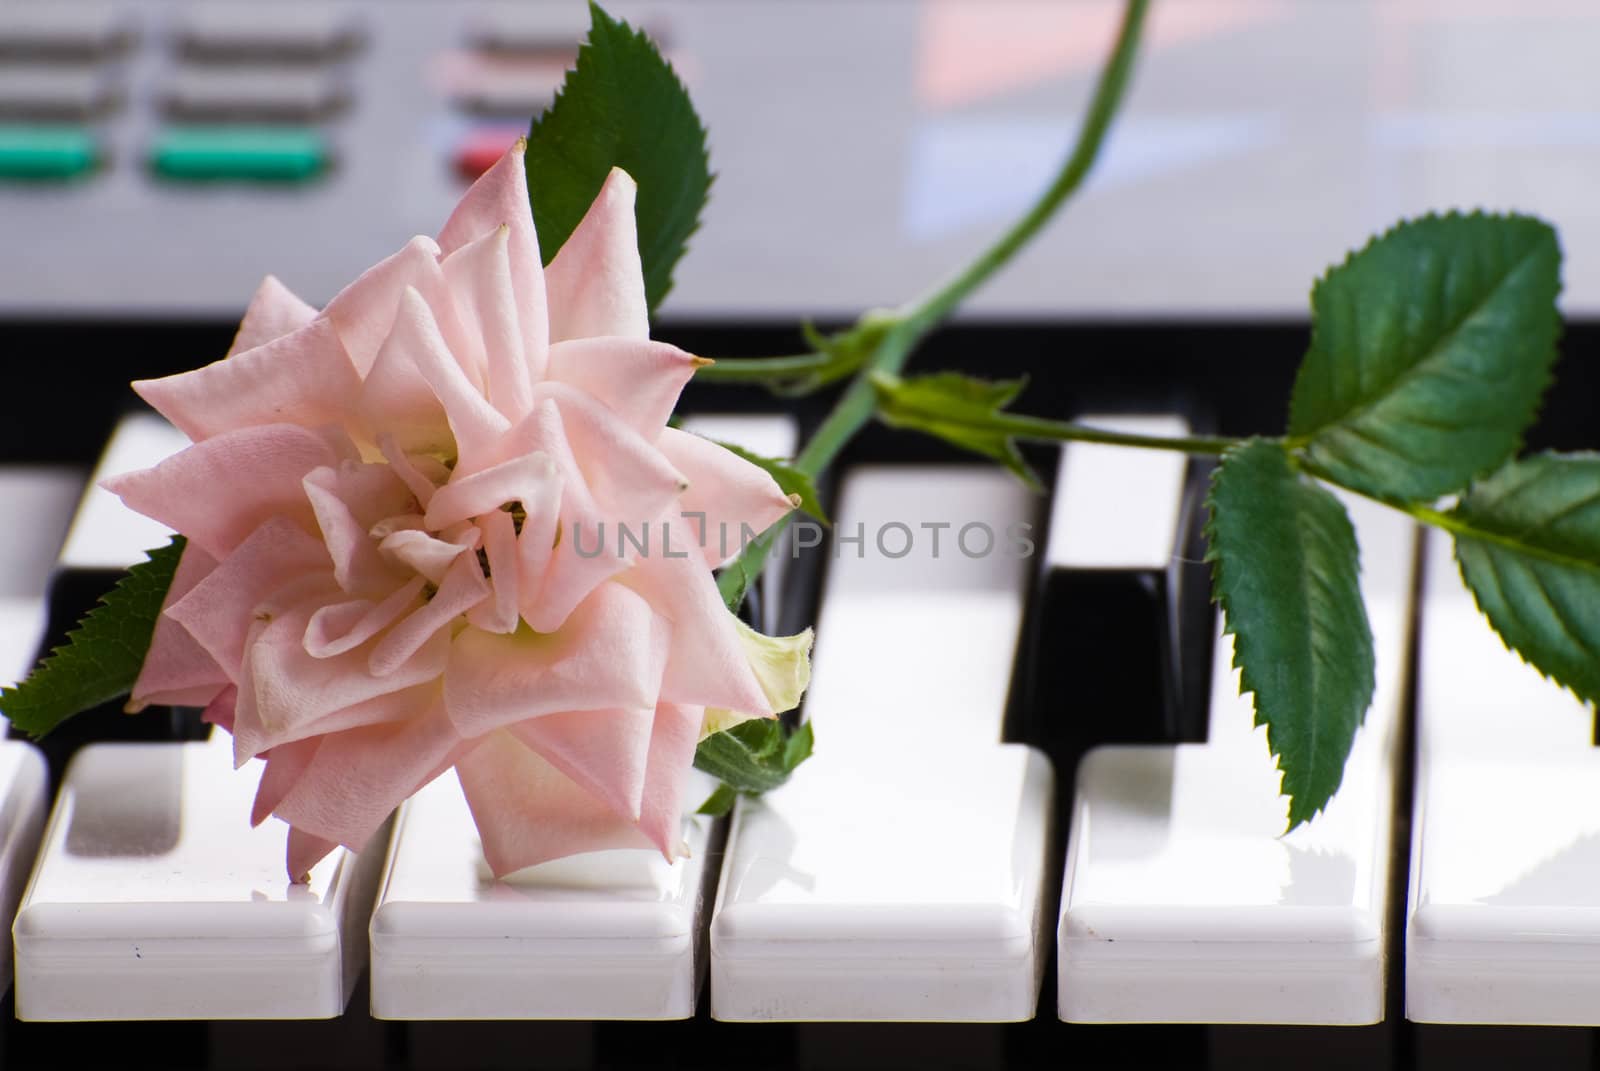 Piano And Rose by dragon_fang